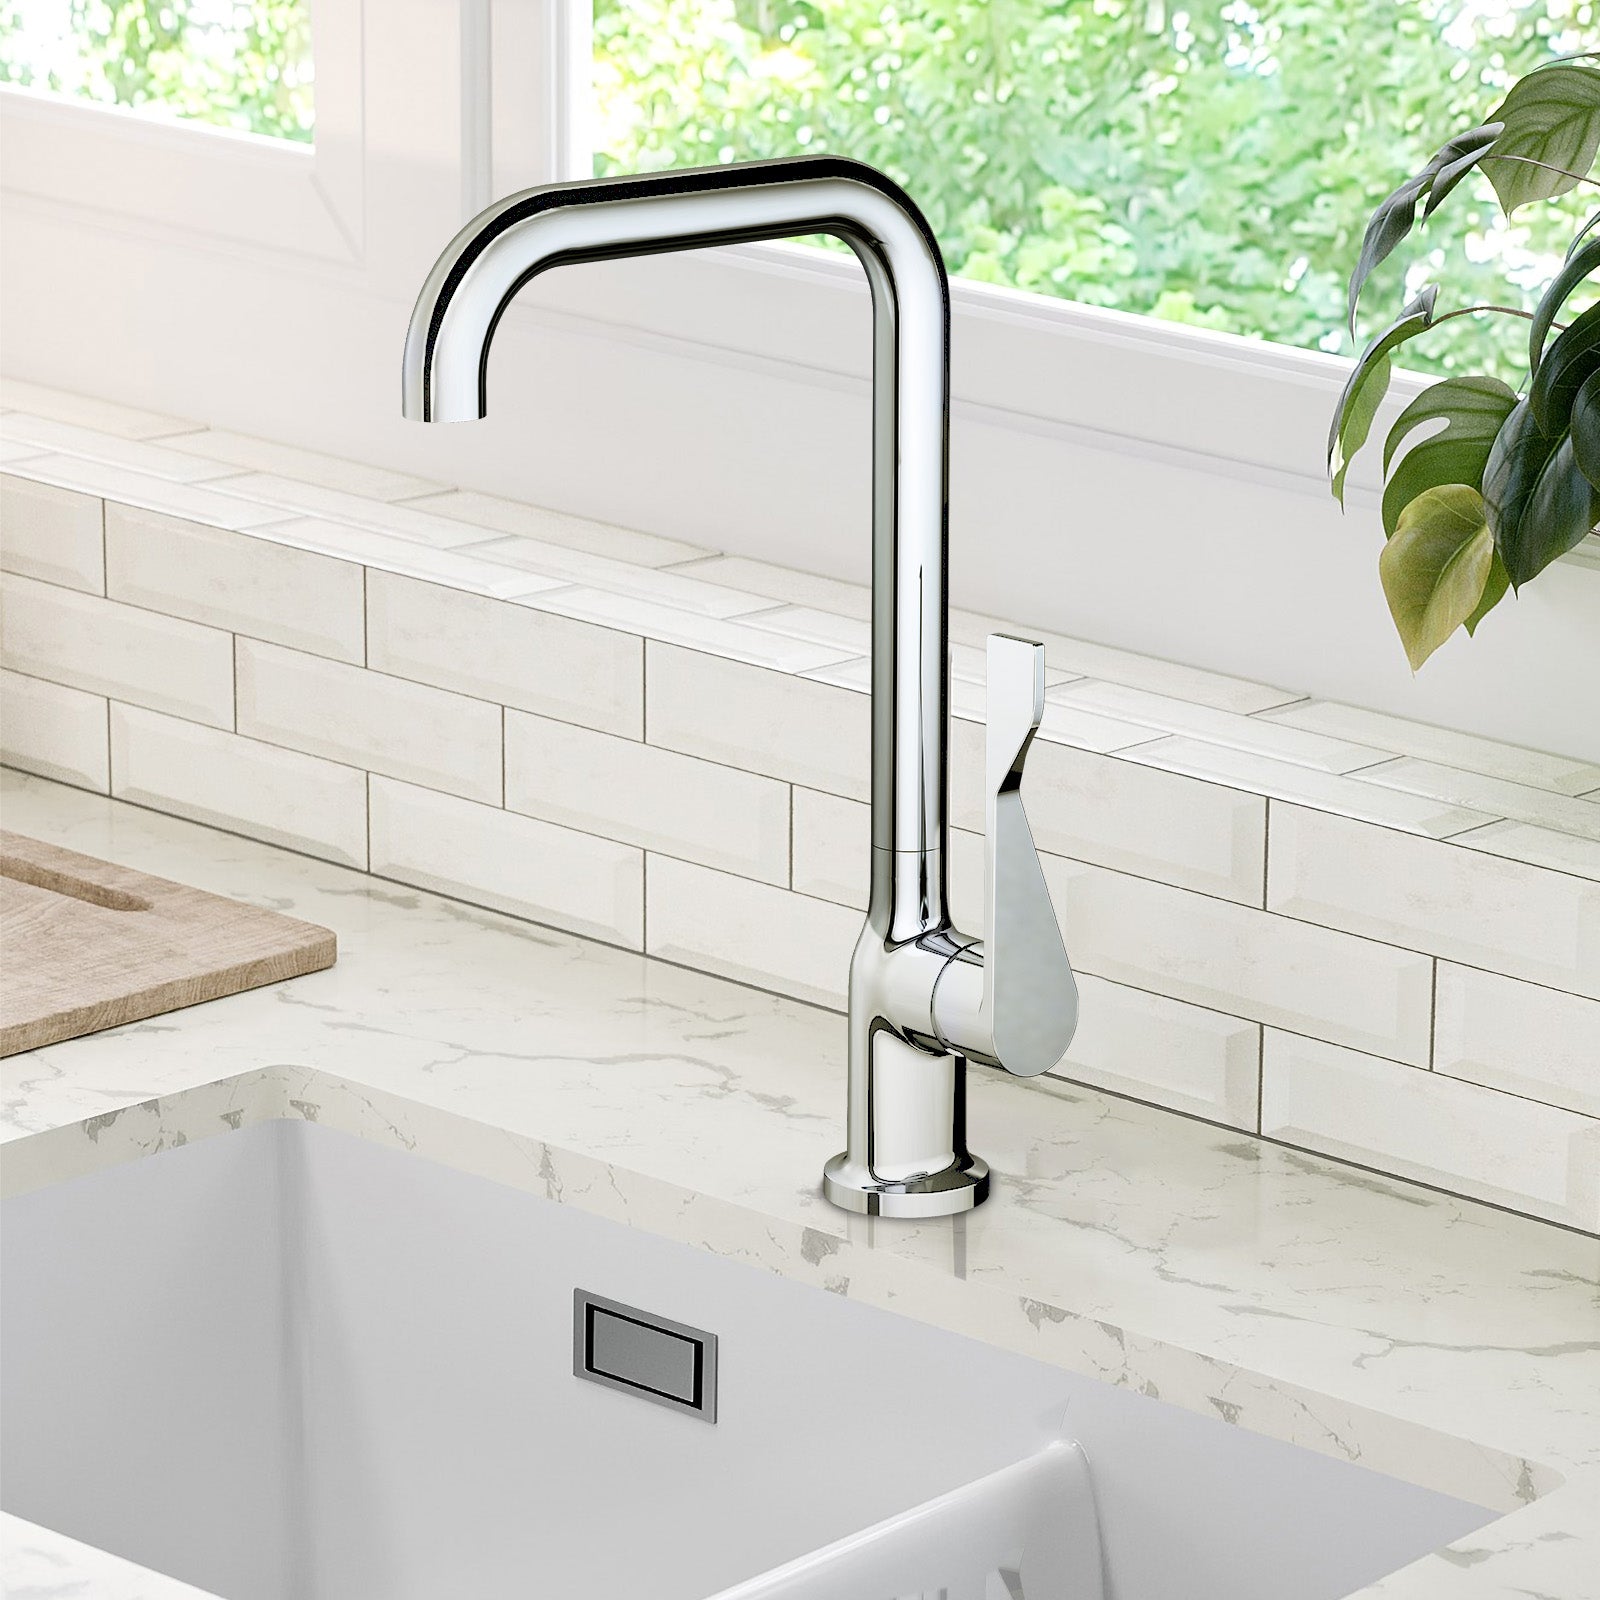 Modern Design Chrome Kitchen Sink Single Lever Mixer Tap With Swivel Spout